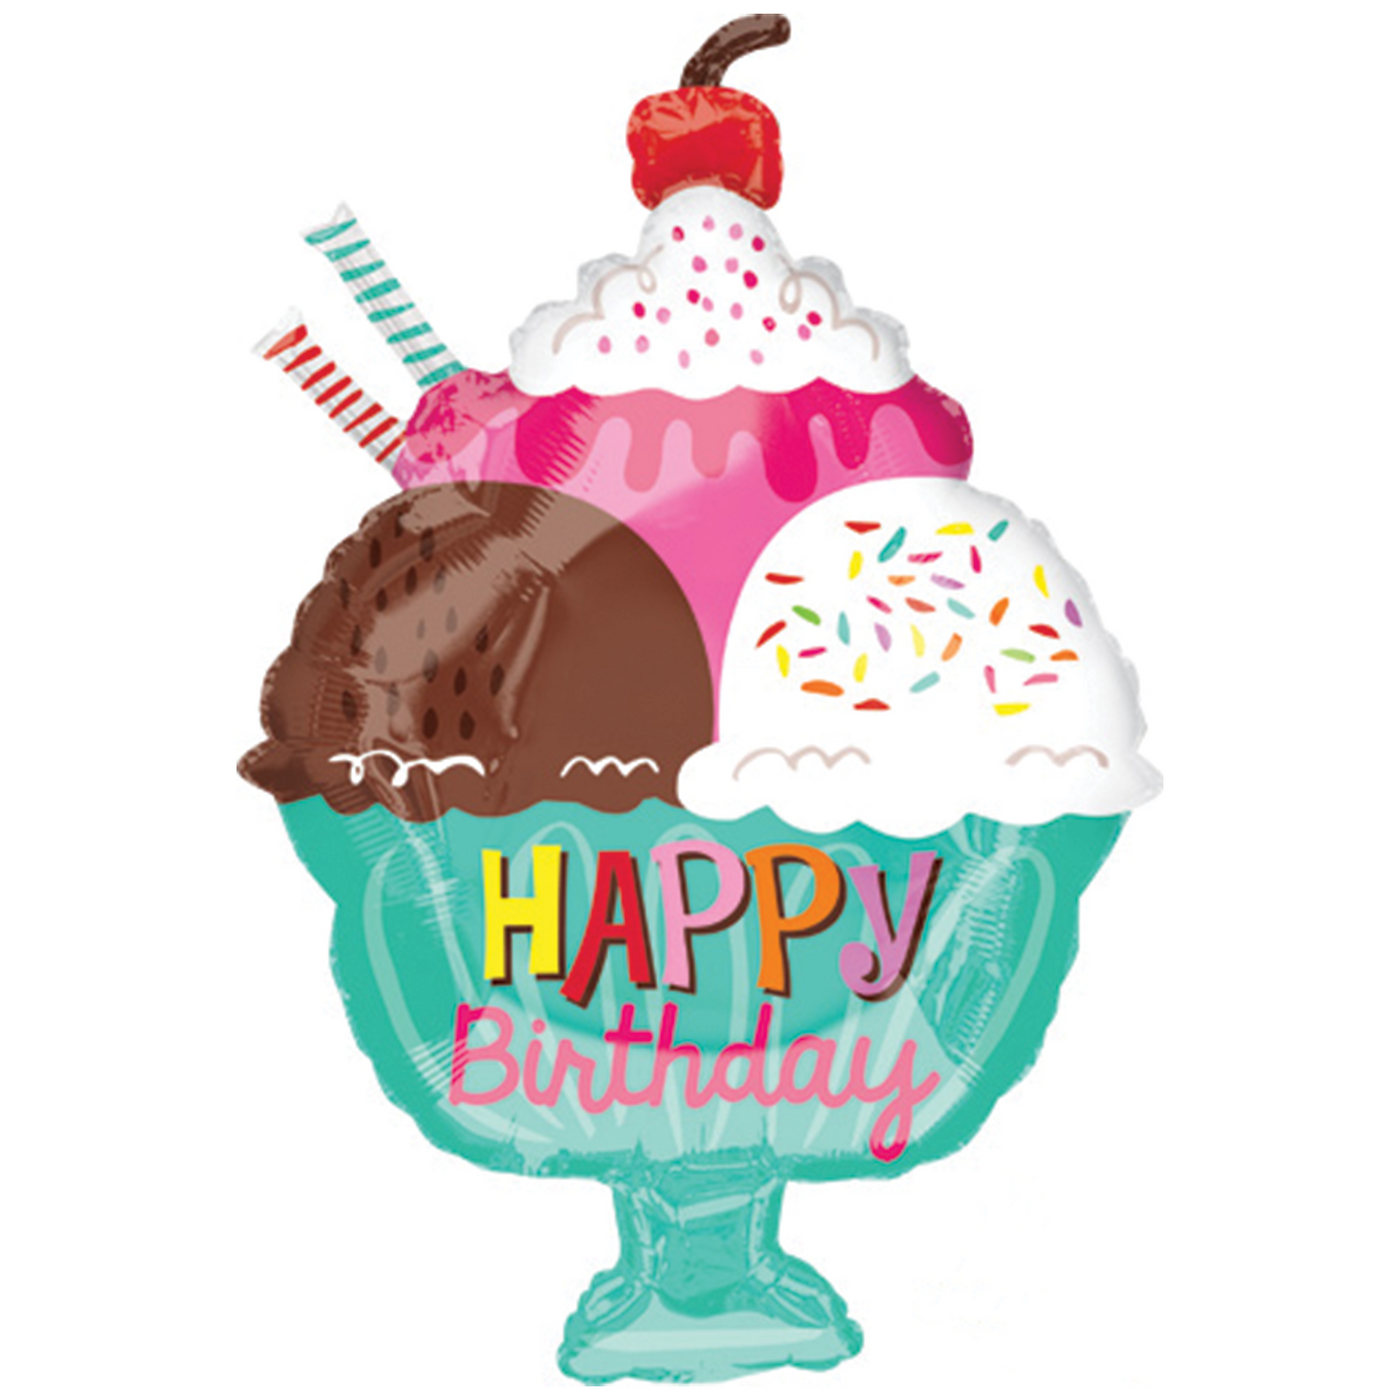 Happy Birthday Sundae Balloon in the shape of an ice-cream sundae with chocolate, vanilla, and strawberry ice cream topped with whipped cream and a cherry in a blue bowl with the words 'happy birthday'